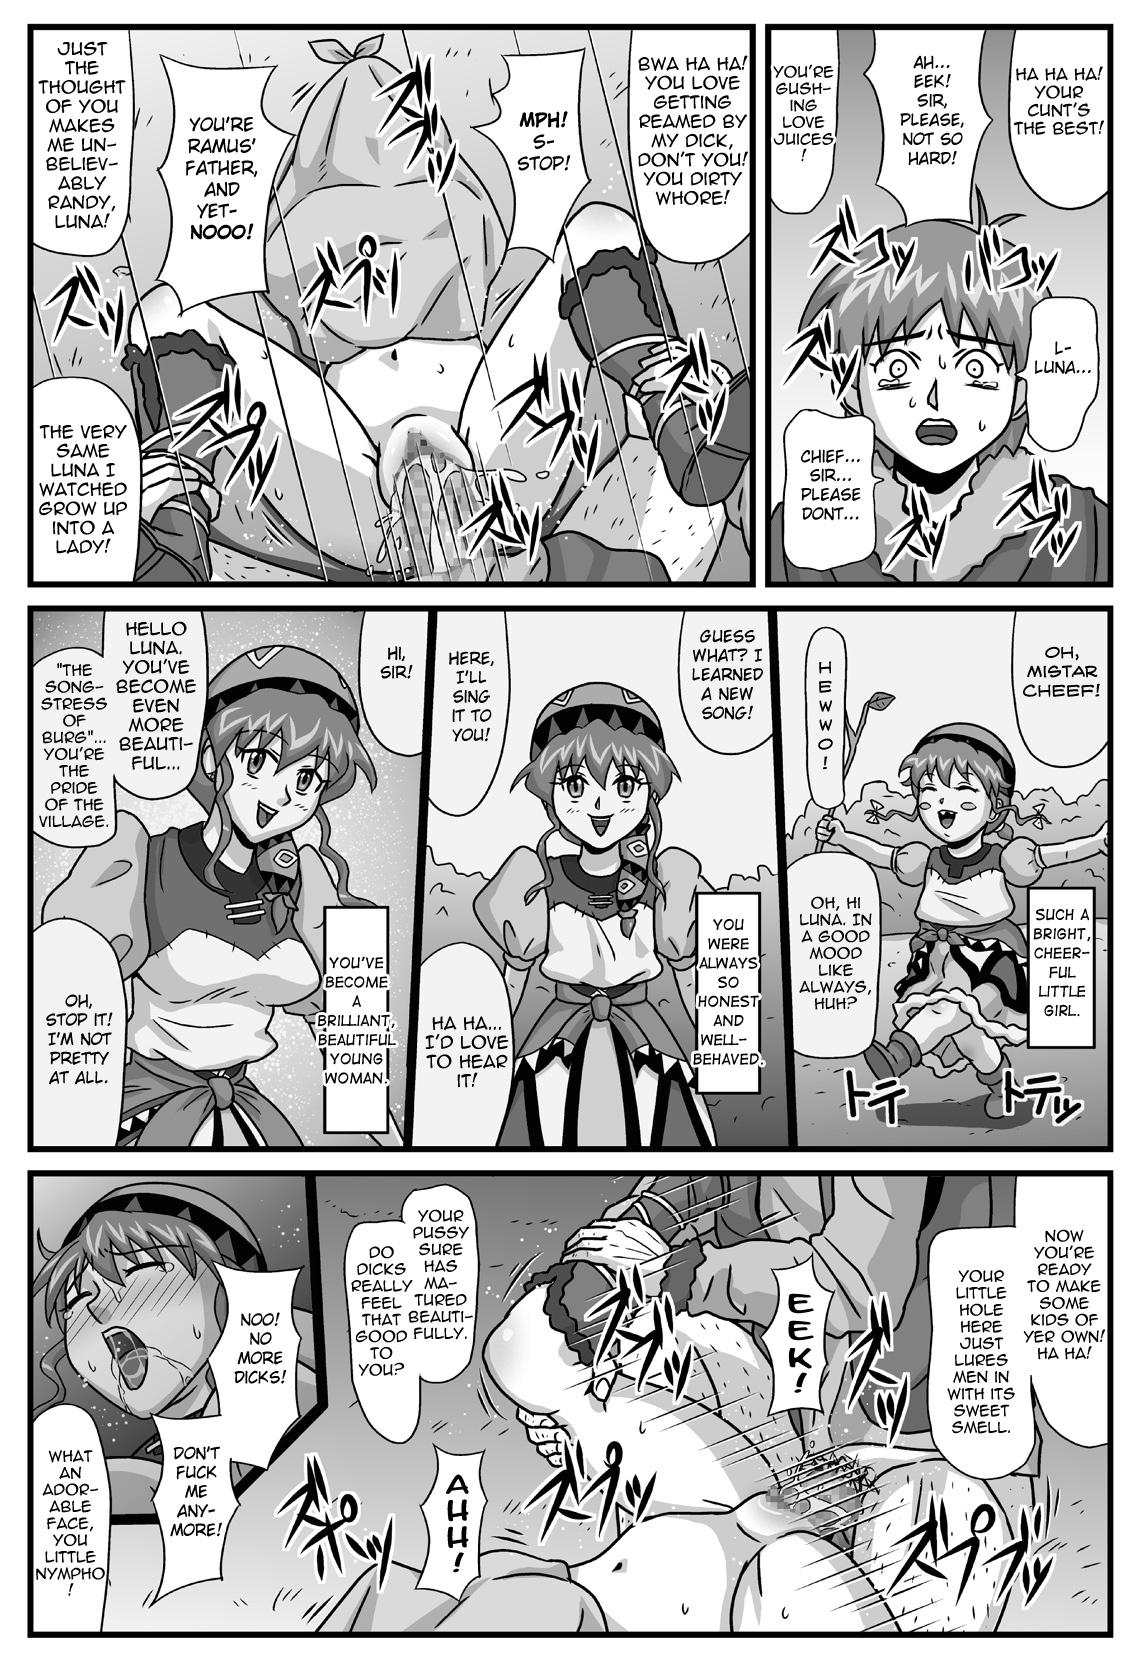 Free Fucking The Cumdumpster Princess of Burg 02 - Lunar silver star story Freaky - Page 9